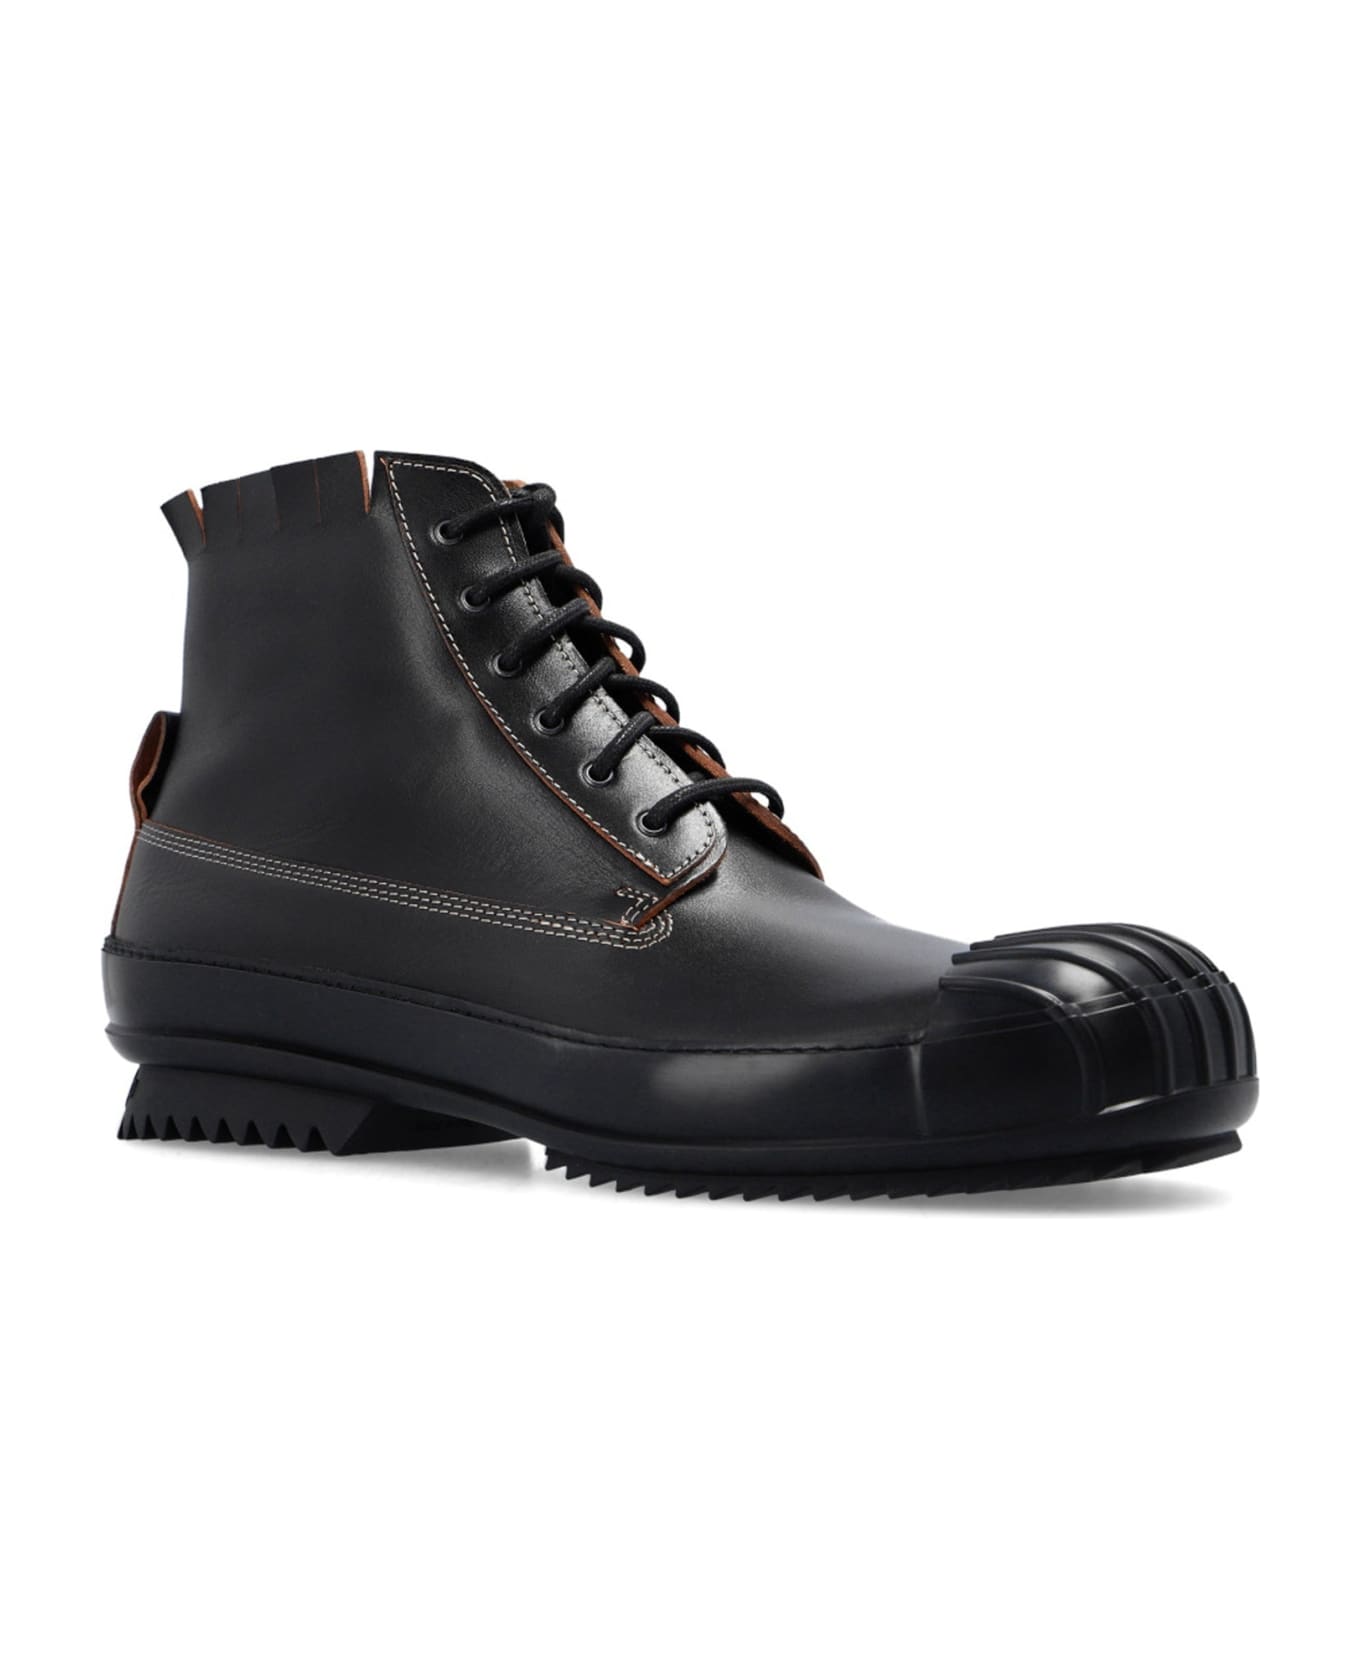 Maison Margiela Leather High-top Sneakers - Black